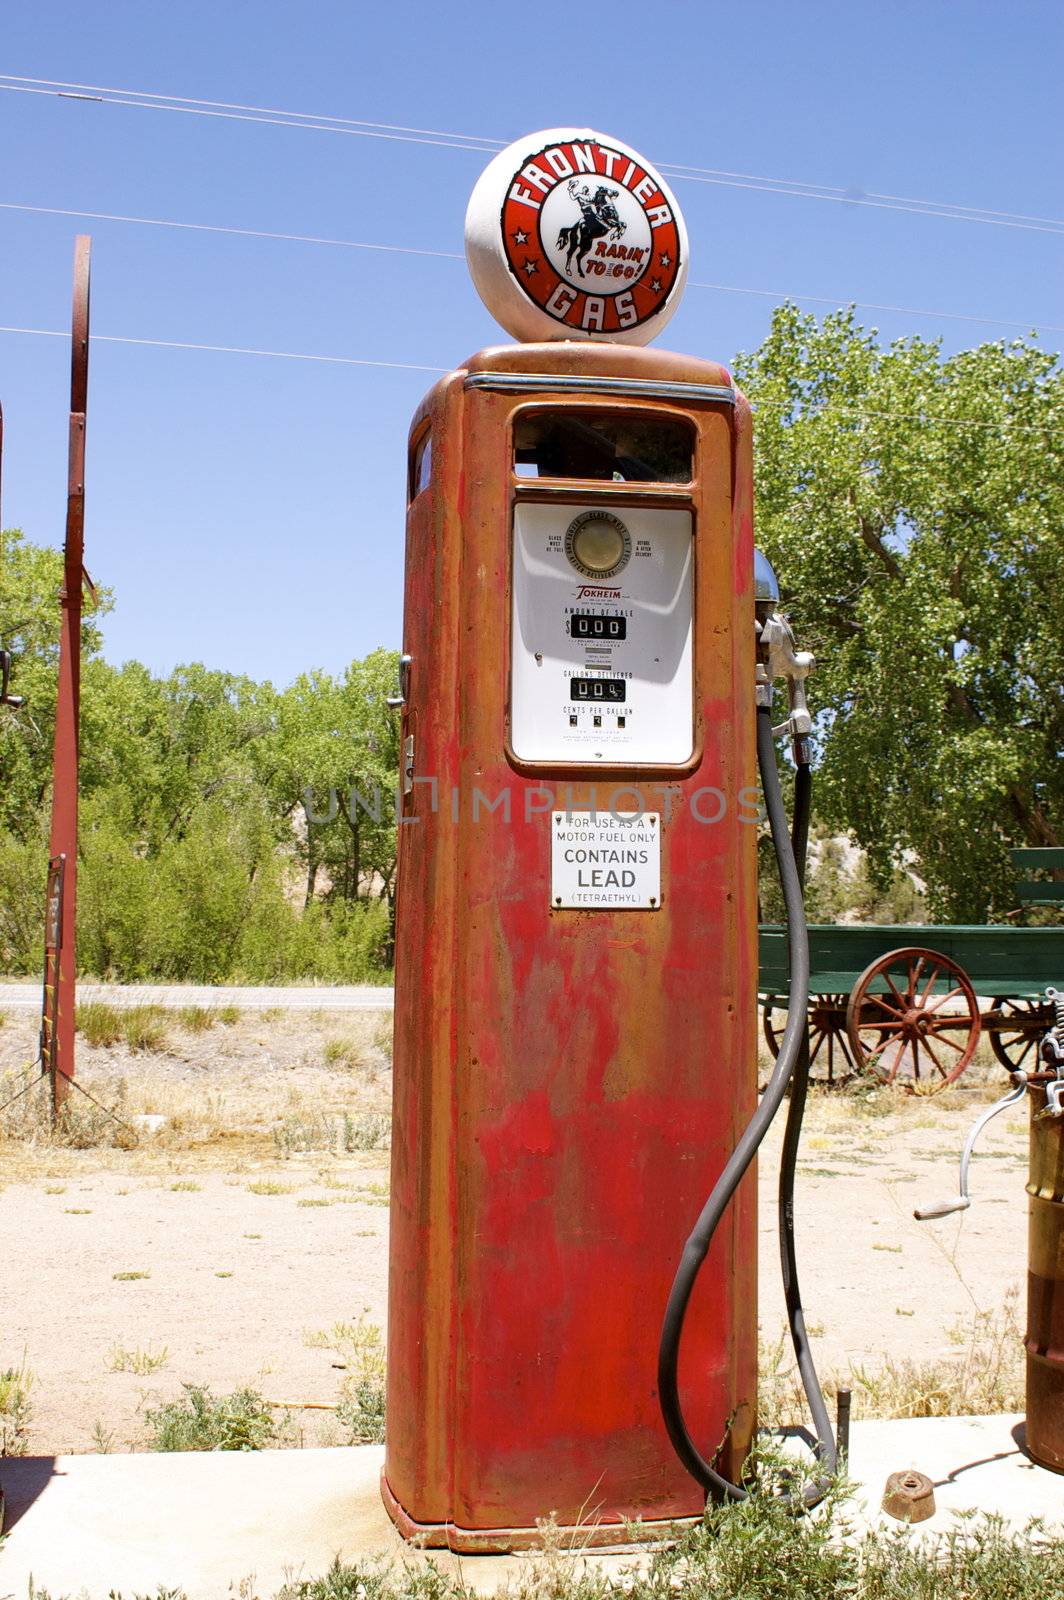 Single old fashioned, vintage red fuel (gas/ petrol) pump, outdoors.